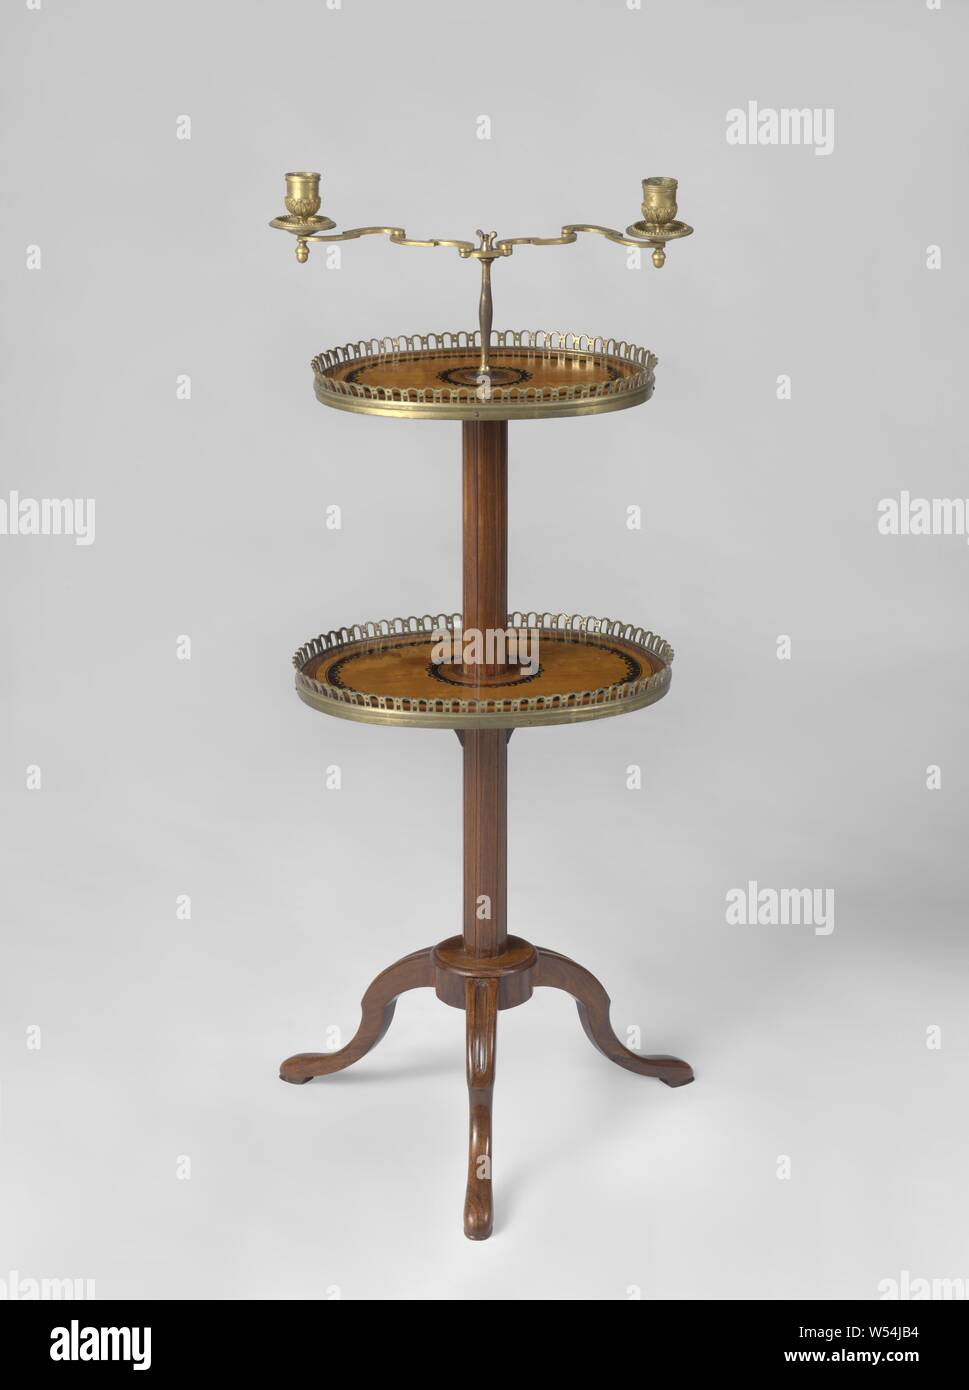 Table, decorated with marquetry and standing on three broken S-shaped, radially placed feet, with cylindrical crossroads and trunk decorated with grooves. With two oval sheets with gilt bronze edging, Table decorated with marquetry of satin, rosewood and ebony on an oak core. Three broken S-shaped feet placed radially on a cylindrical intersection carry the round trunk, adorned with grooves. At oval height and on top are oval sheets that have marquetry edges with circular protuberances and have a gilt bronze border with a gallery around them. In the middle of the trunk an adjustable steel bar Stock Photo